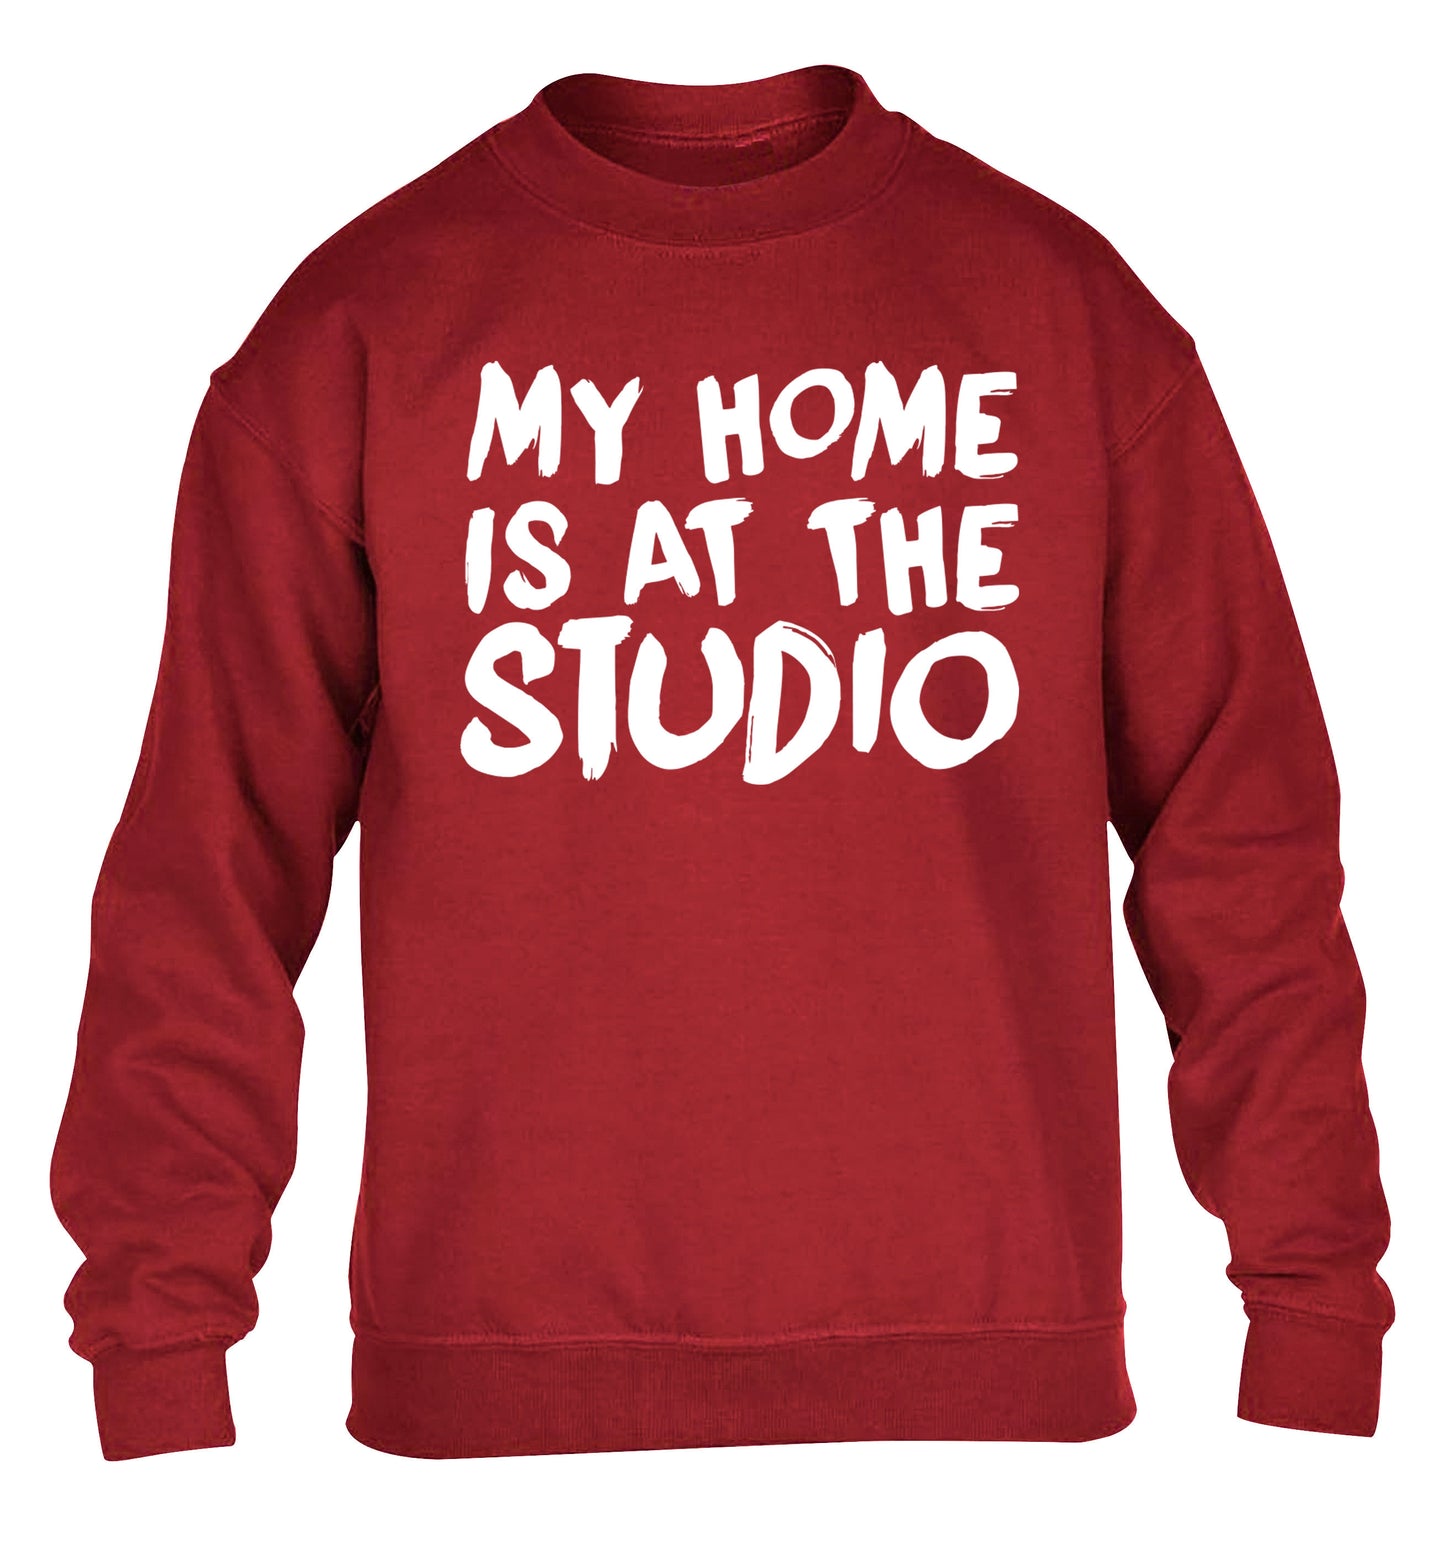 My home is at the studio children's grey sweater 12-14 Years